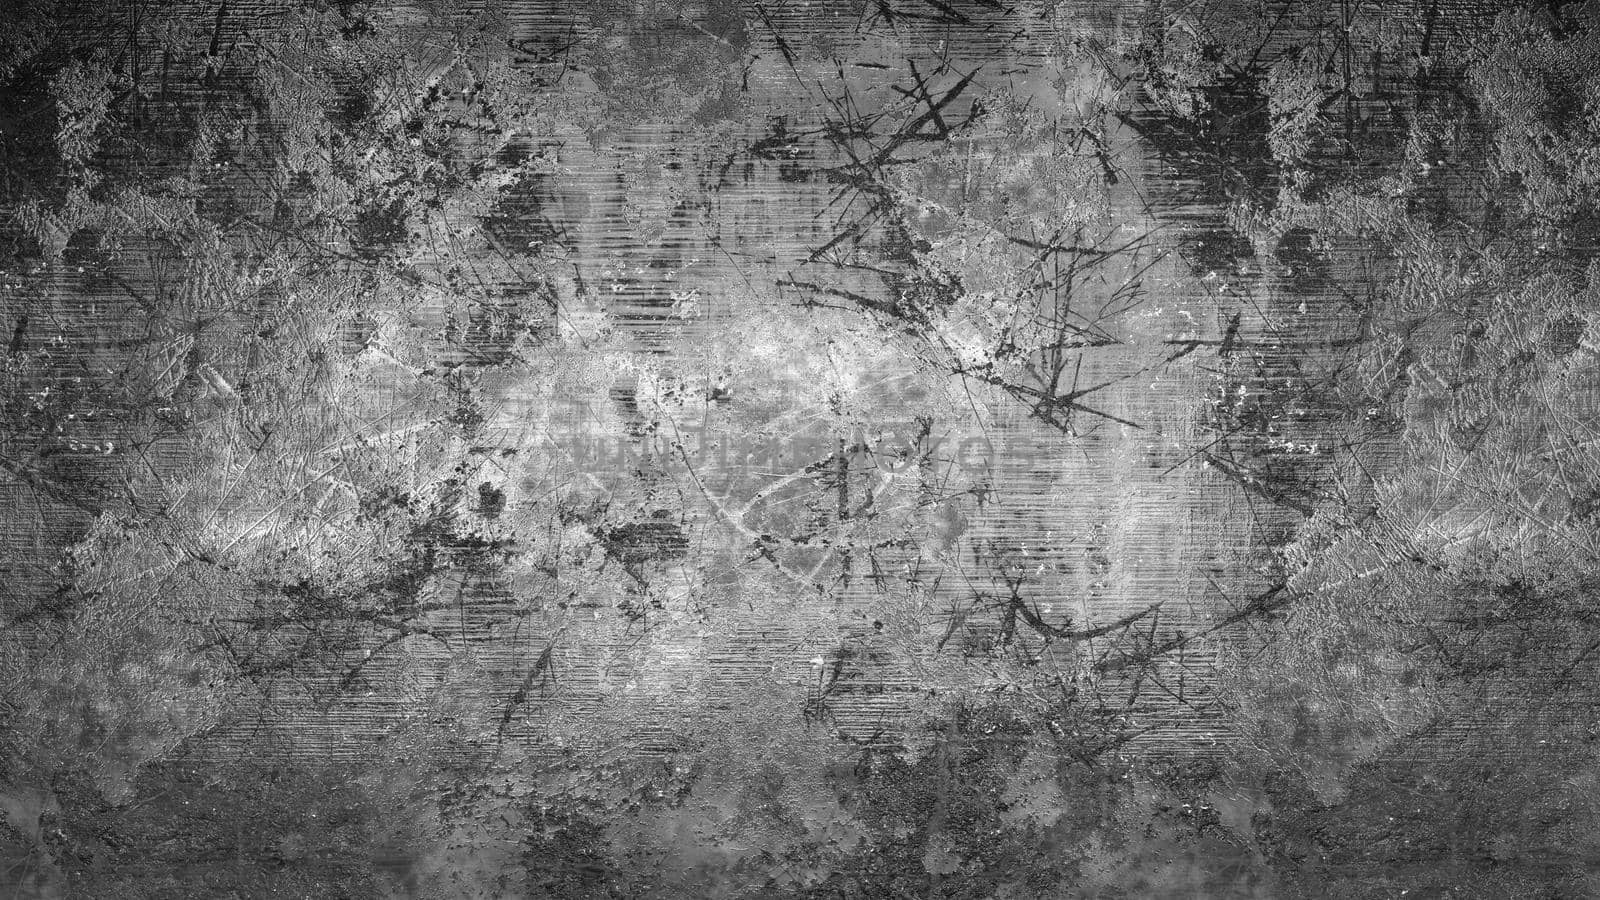 Grunge iron plate. Industrial metal background. 3d rendering by Taut